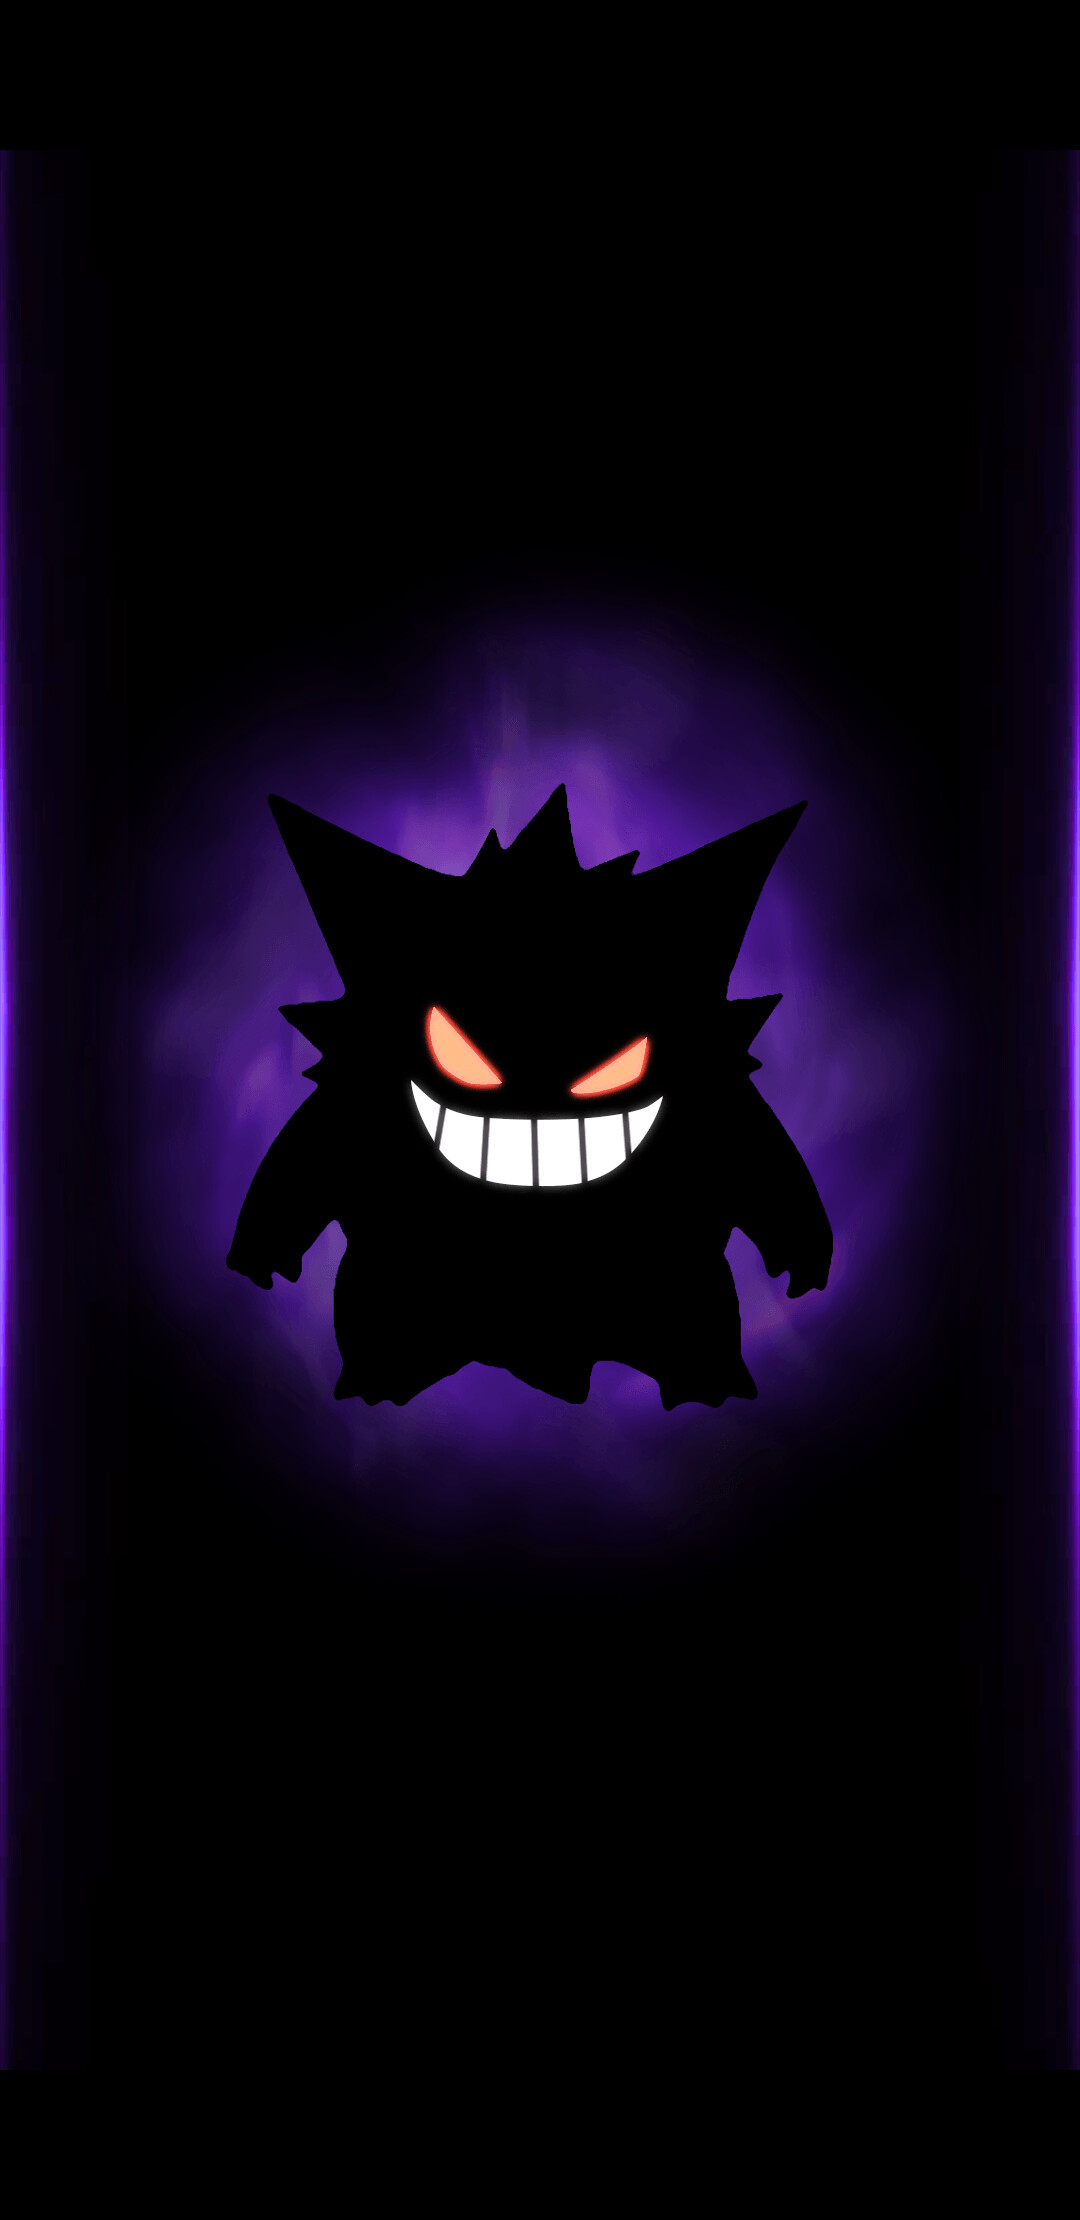 Ghost Pokemon: Gengar, A very mischievous, and at times, malicious species, The master of stealth. 1080x2220 HD Wallpaper.